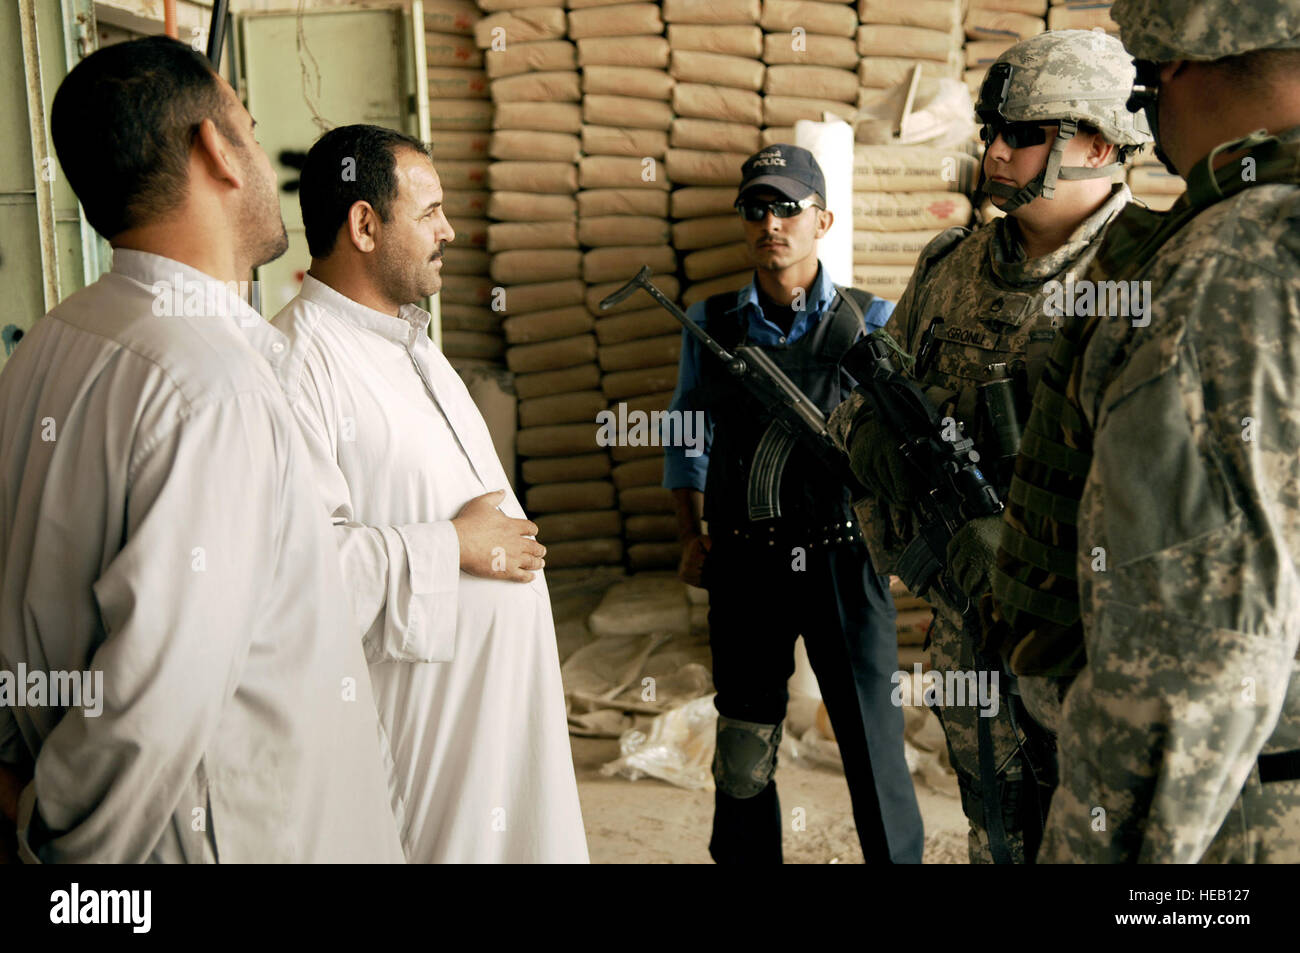 U.S. Army Staff Sgt. Christopher Gronli, a military policeman from 411th Military Police Company, 716th Military Police Battalion, 101st Airborne Division, and Iraqi police, talk to local shop owners to address any concerns they may have in the Meshahdah province, Iraq, during a dismounted patrol on April 8, 2008. Tech. Sgt. William Greer) Stock Photo